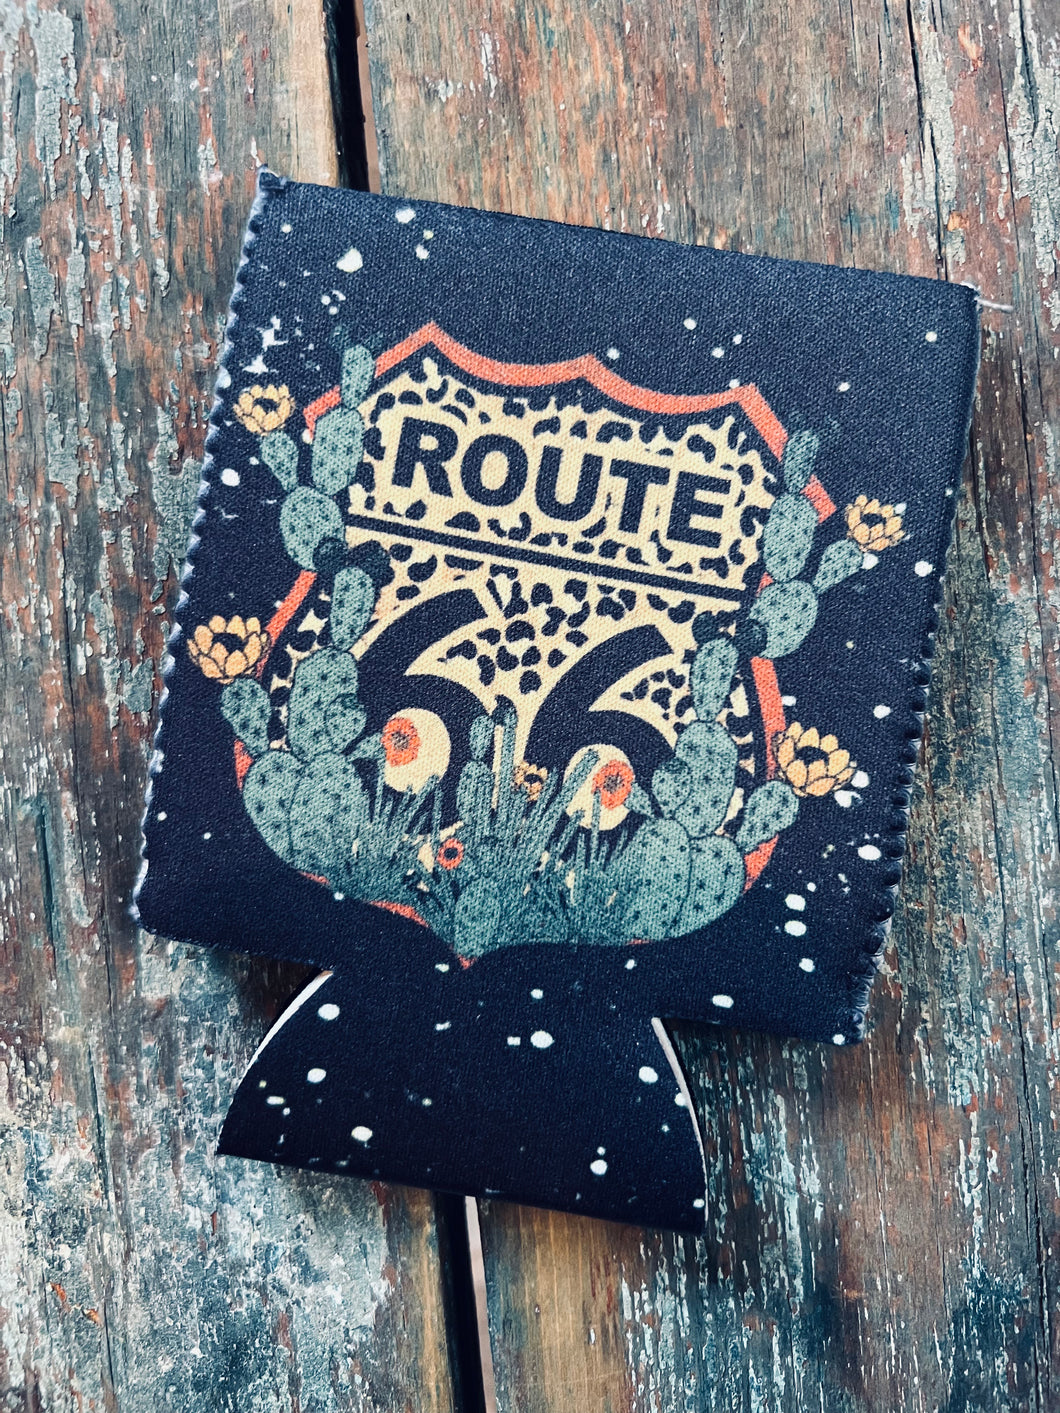 Route 66 drink sleeve